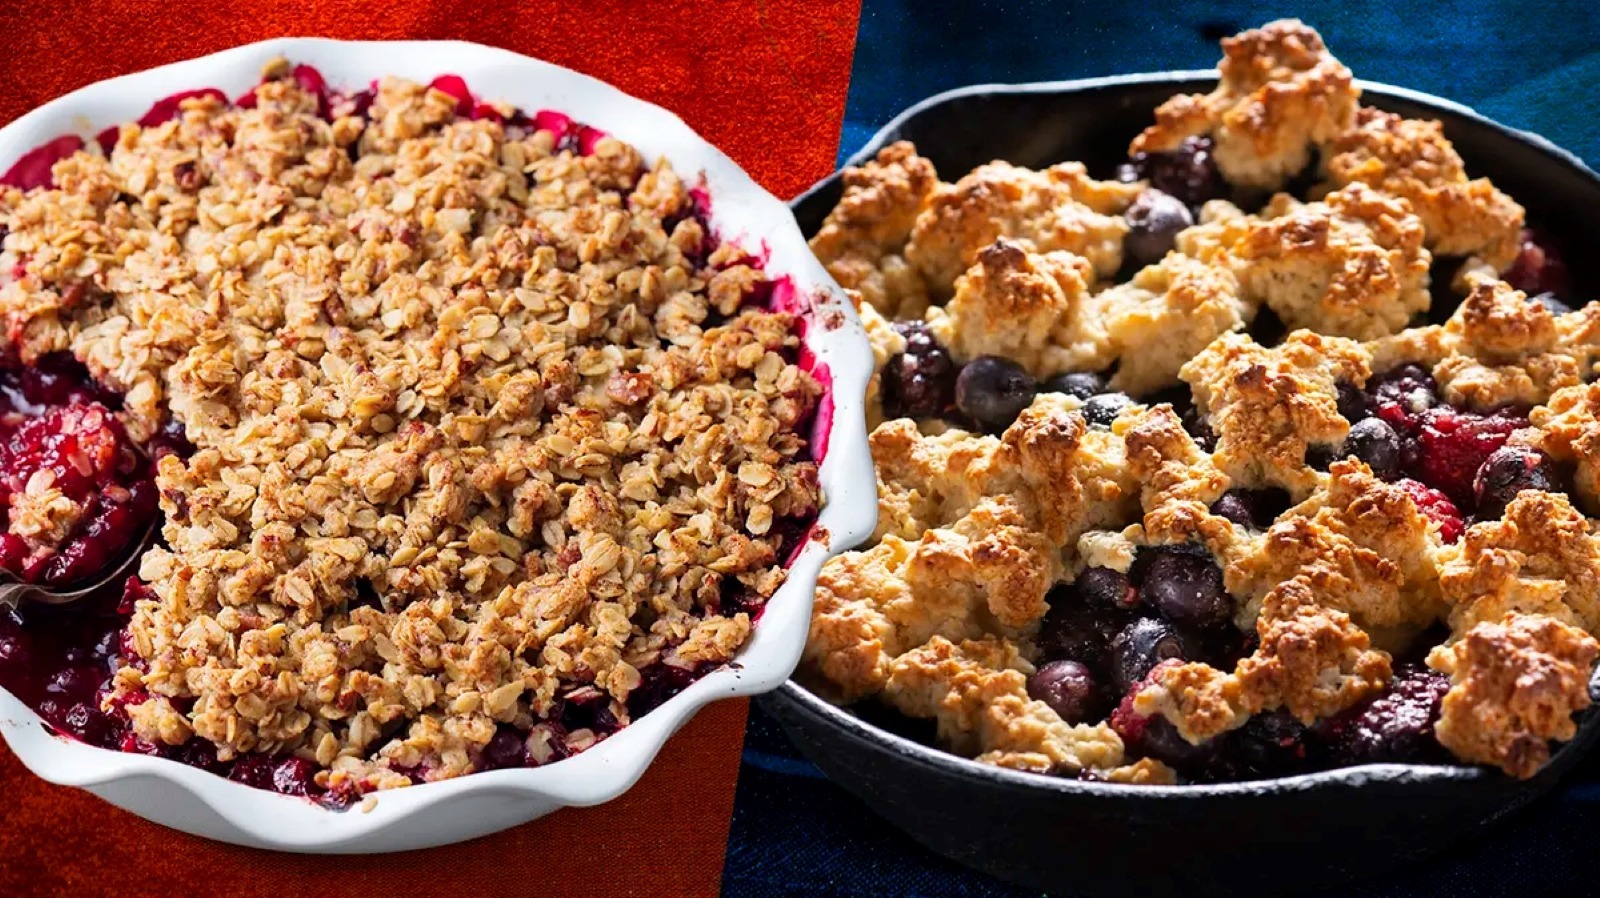 What's The Difference Between A Cobbler And A Crumble?